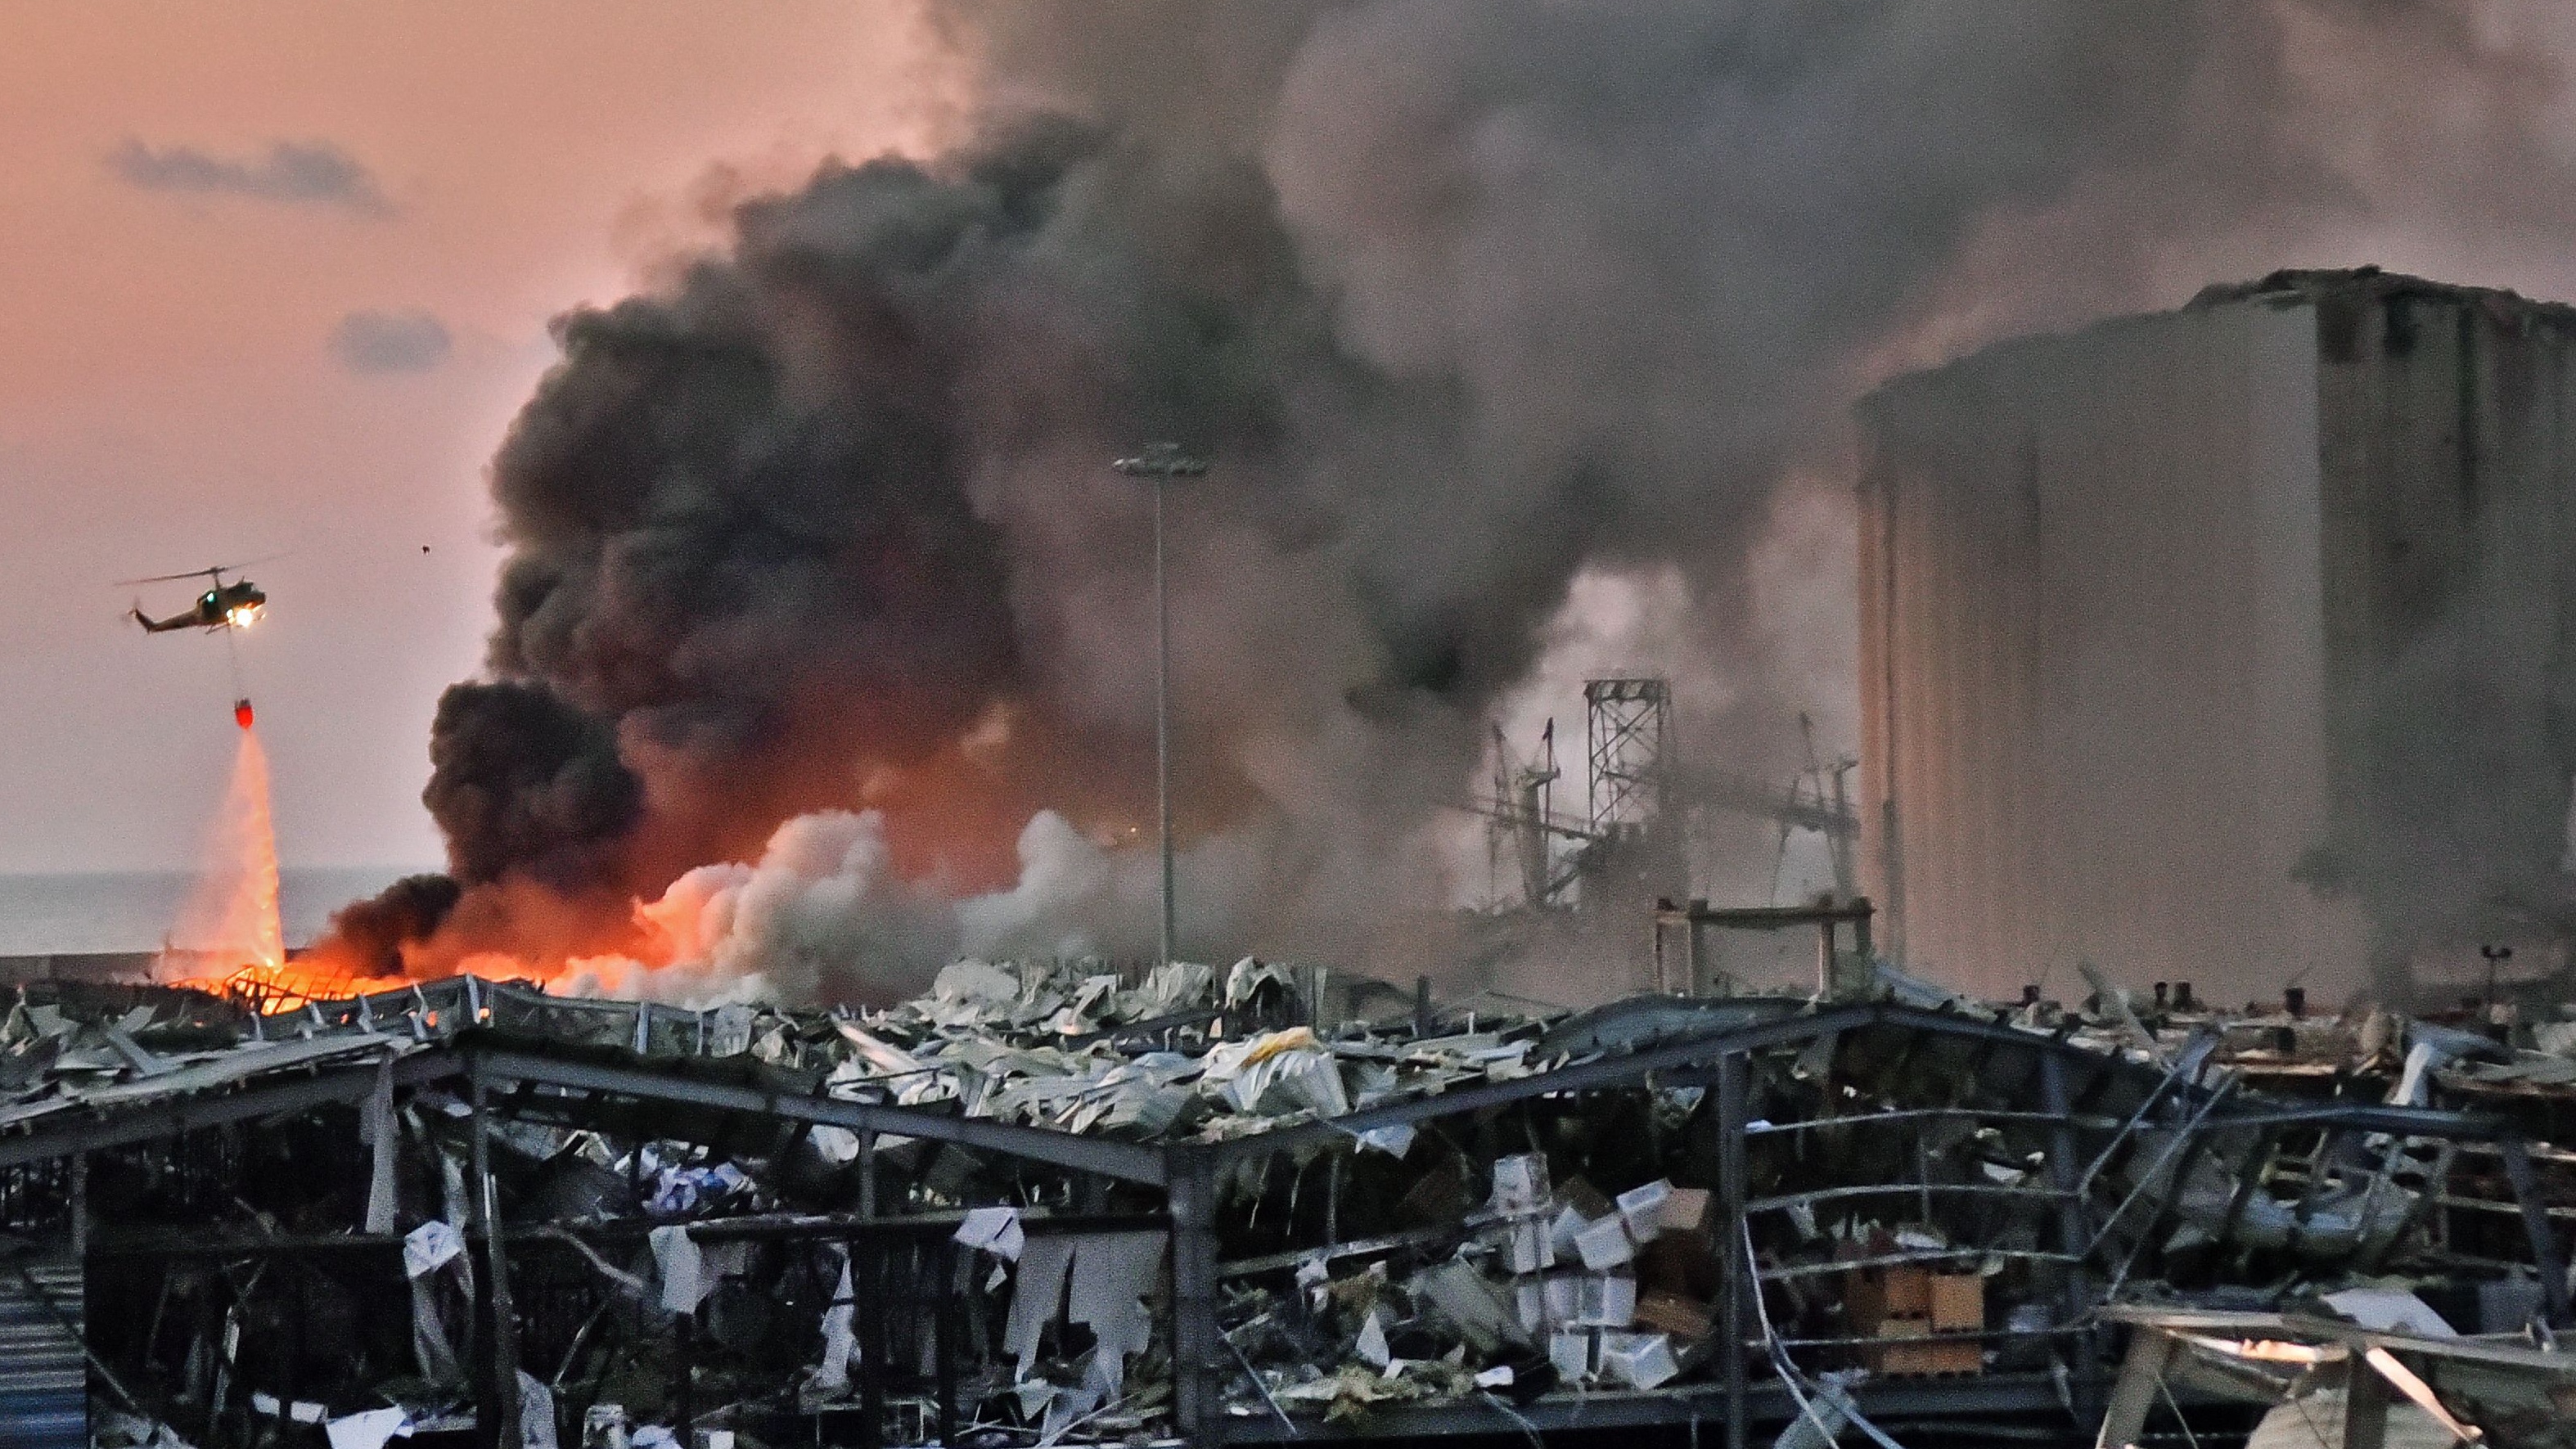 The aftermath of the explosion in the port of Beirut